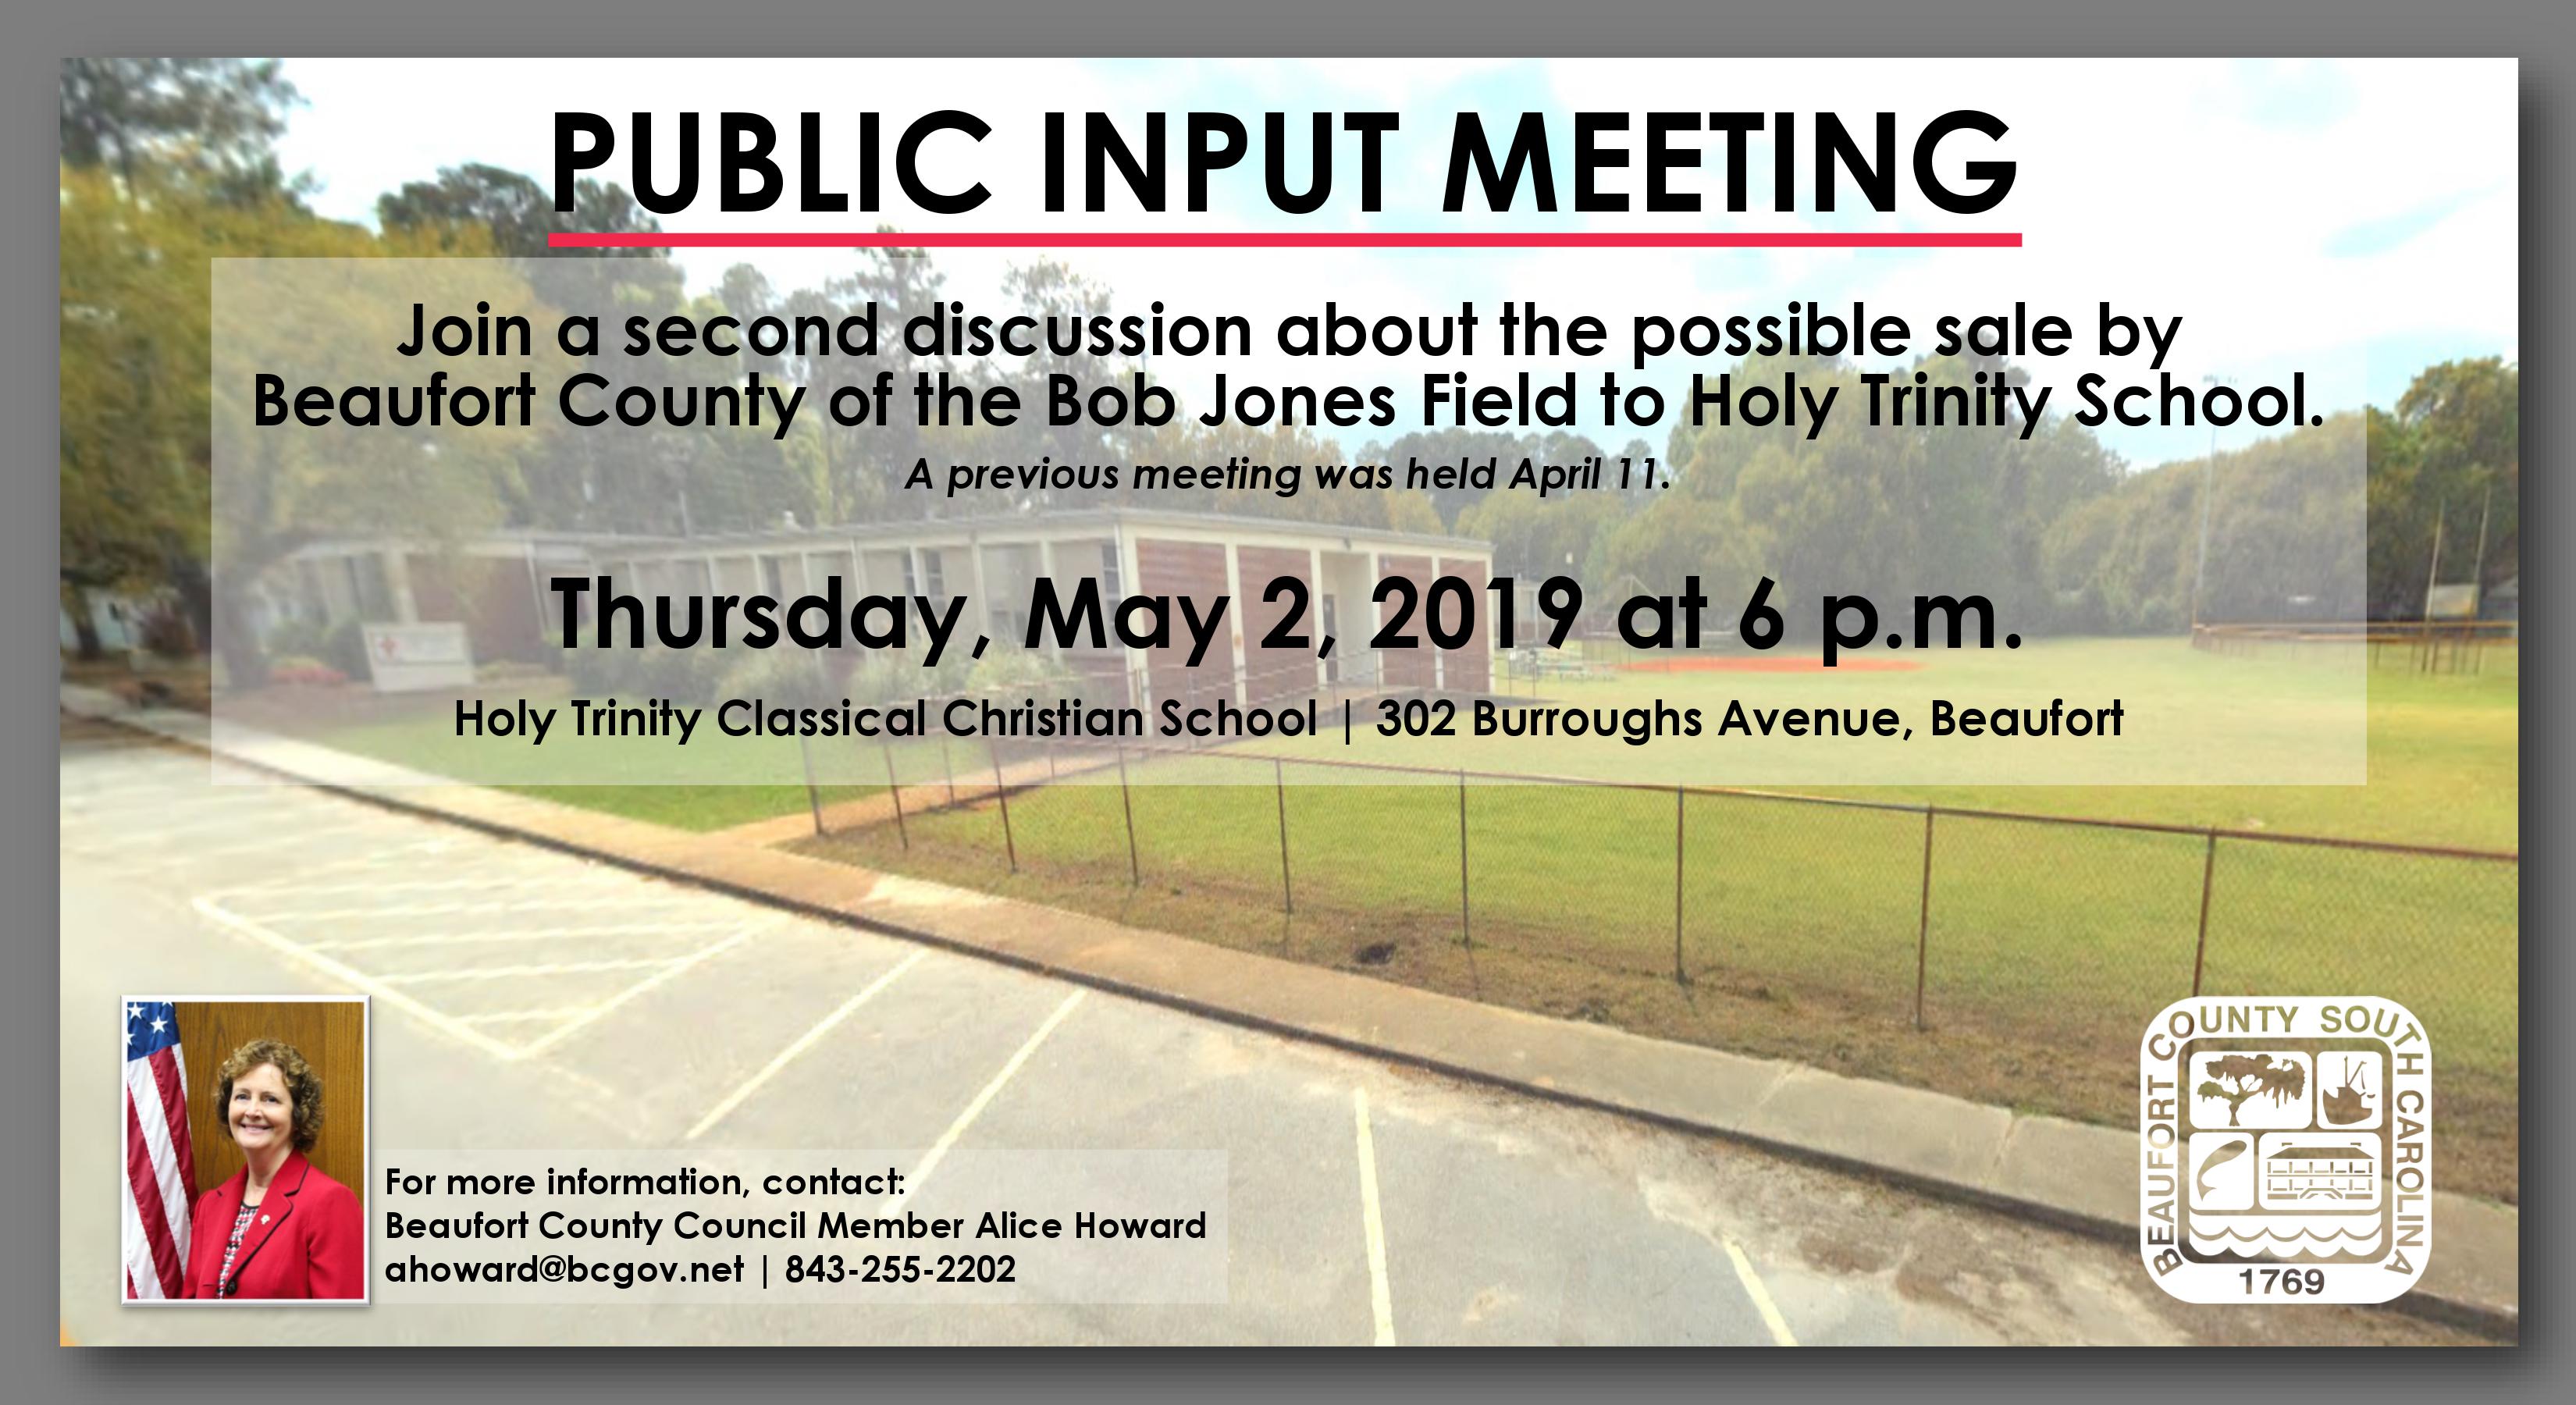 Beaufort County Holding Second Public Input Meeting May 2 on Possible Sale of Bob Jones Field